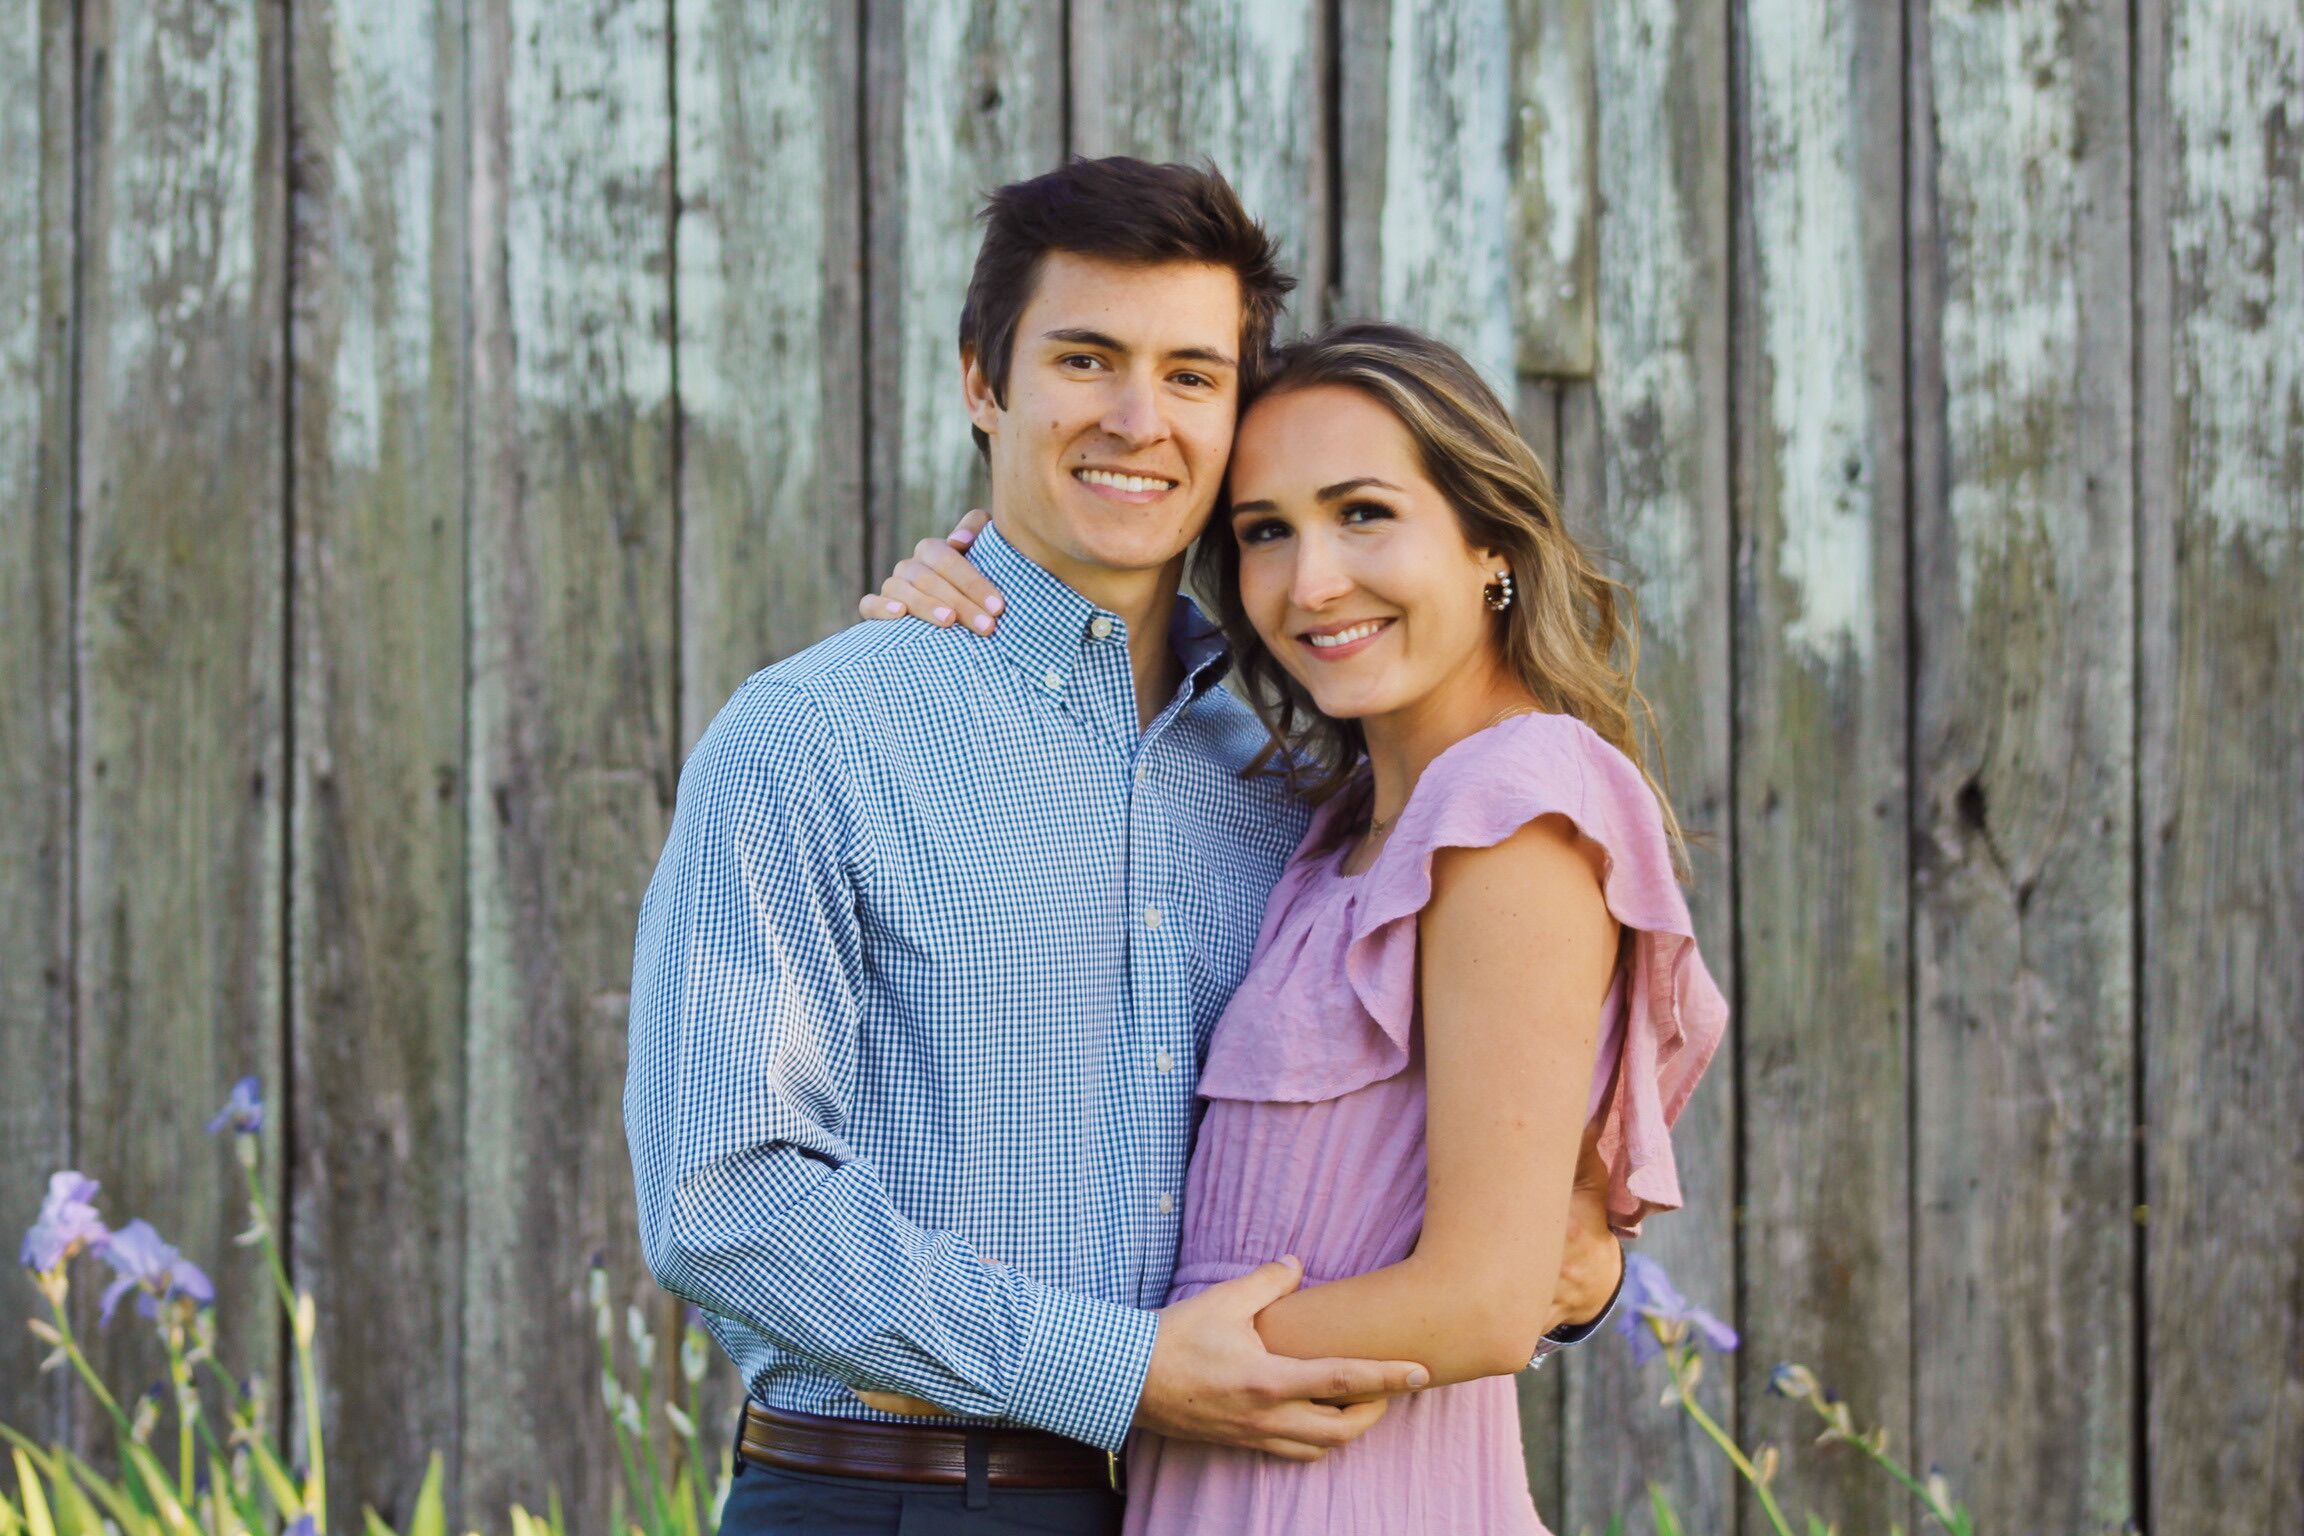 Rachel Teeters and Cole Yeomans's Wedding Website - The Knot